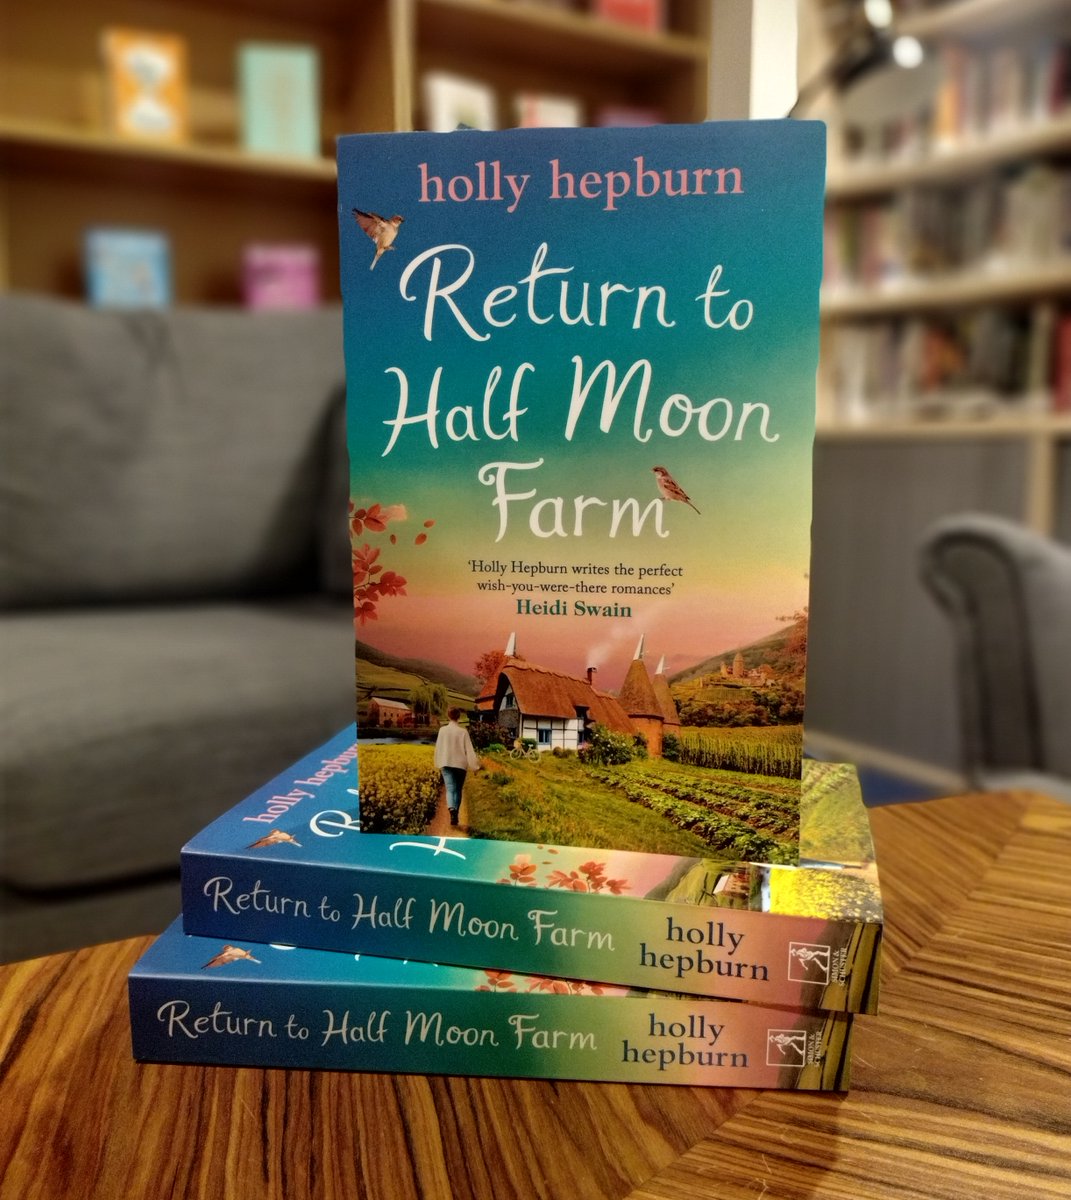 To celebrate paperback publication of #ReturnToHalfMoonFarm, I've got 3 copies to giveaway! RP & Follow by 23rd Jan to get in my Big Hat of Chance. First 3 random (UK only) @'s out of the hat at noon, #WIN. simonandschuster.co.uk/books/Return-t…